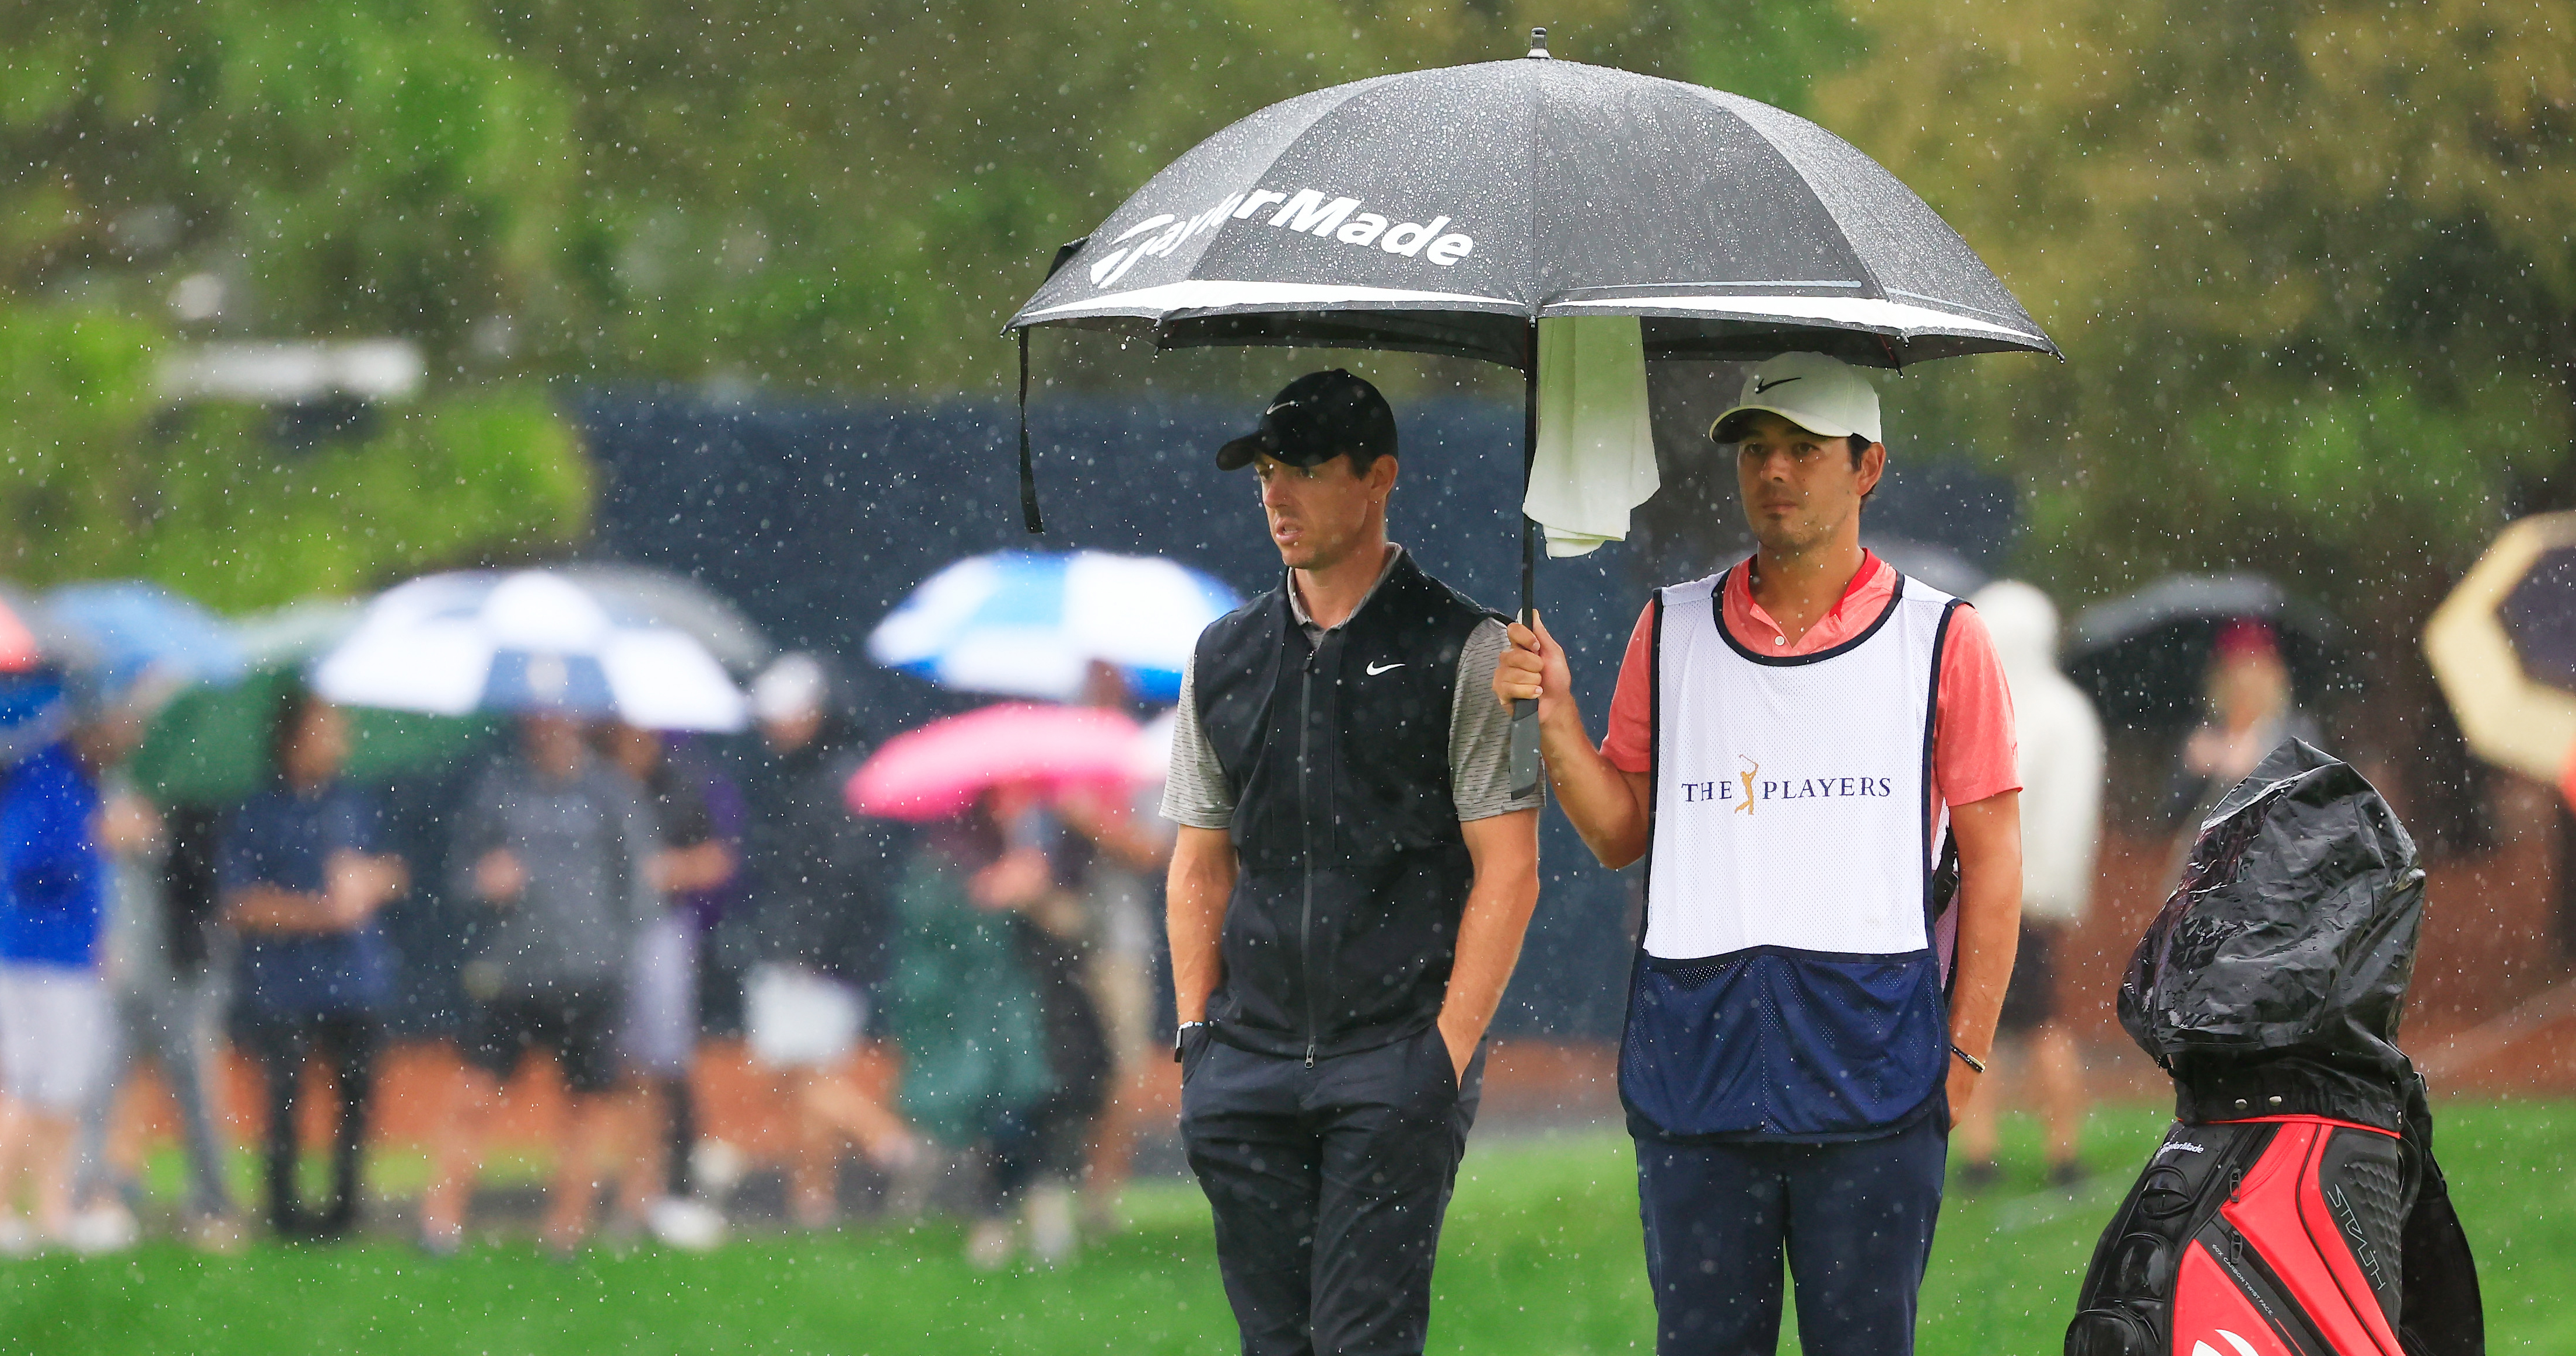 Players 2022 live updates Play has been suspended for the day, ensuring a Monday finish Golf News and Tour Information Golf Digest